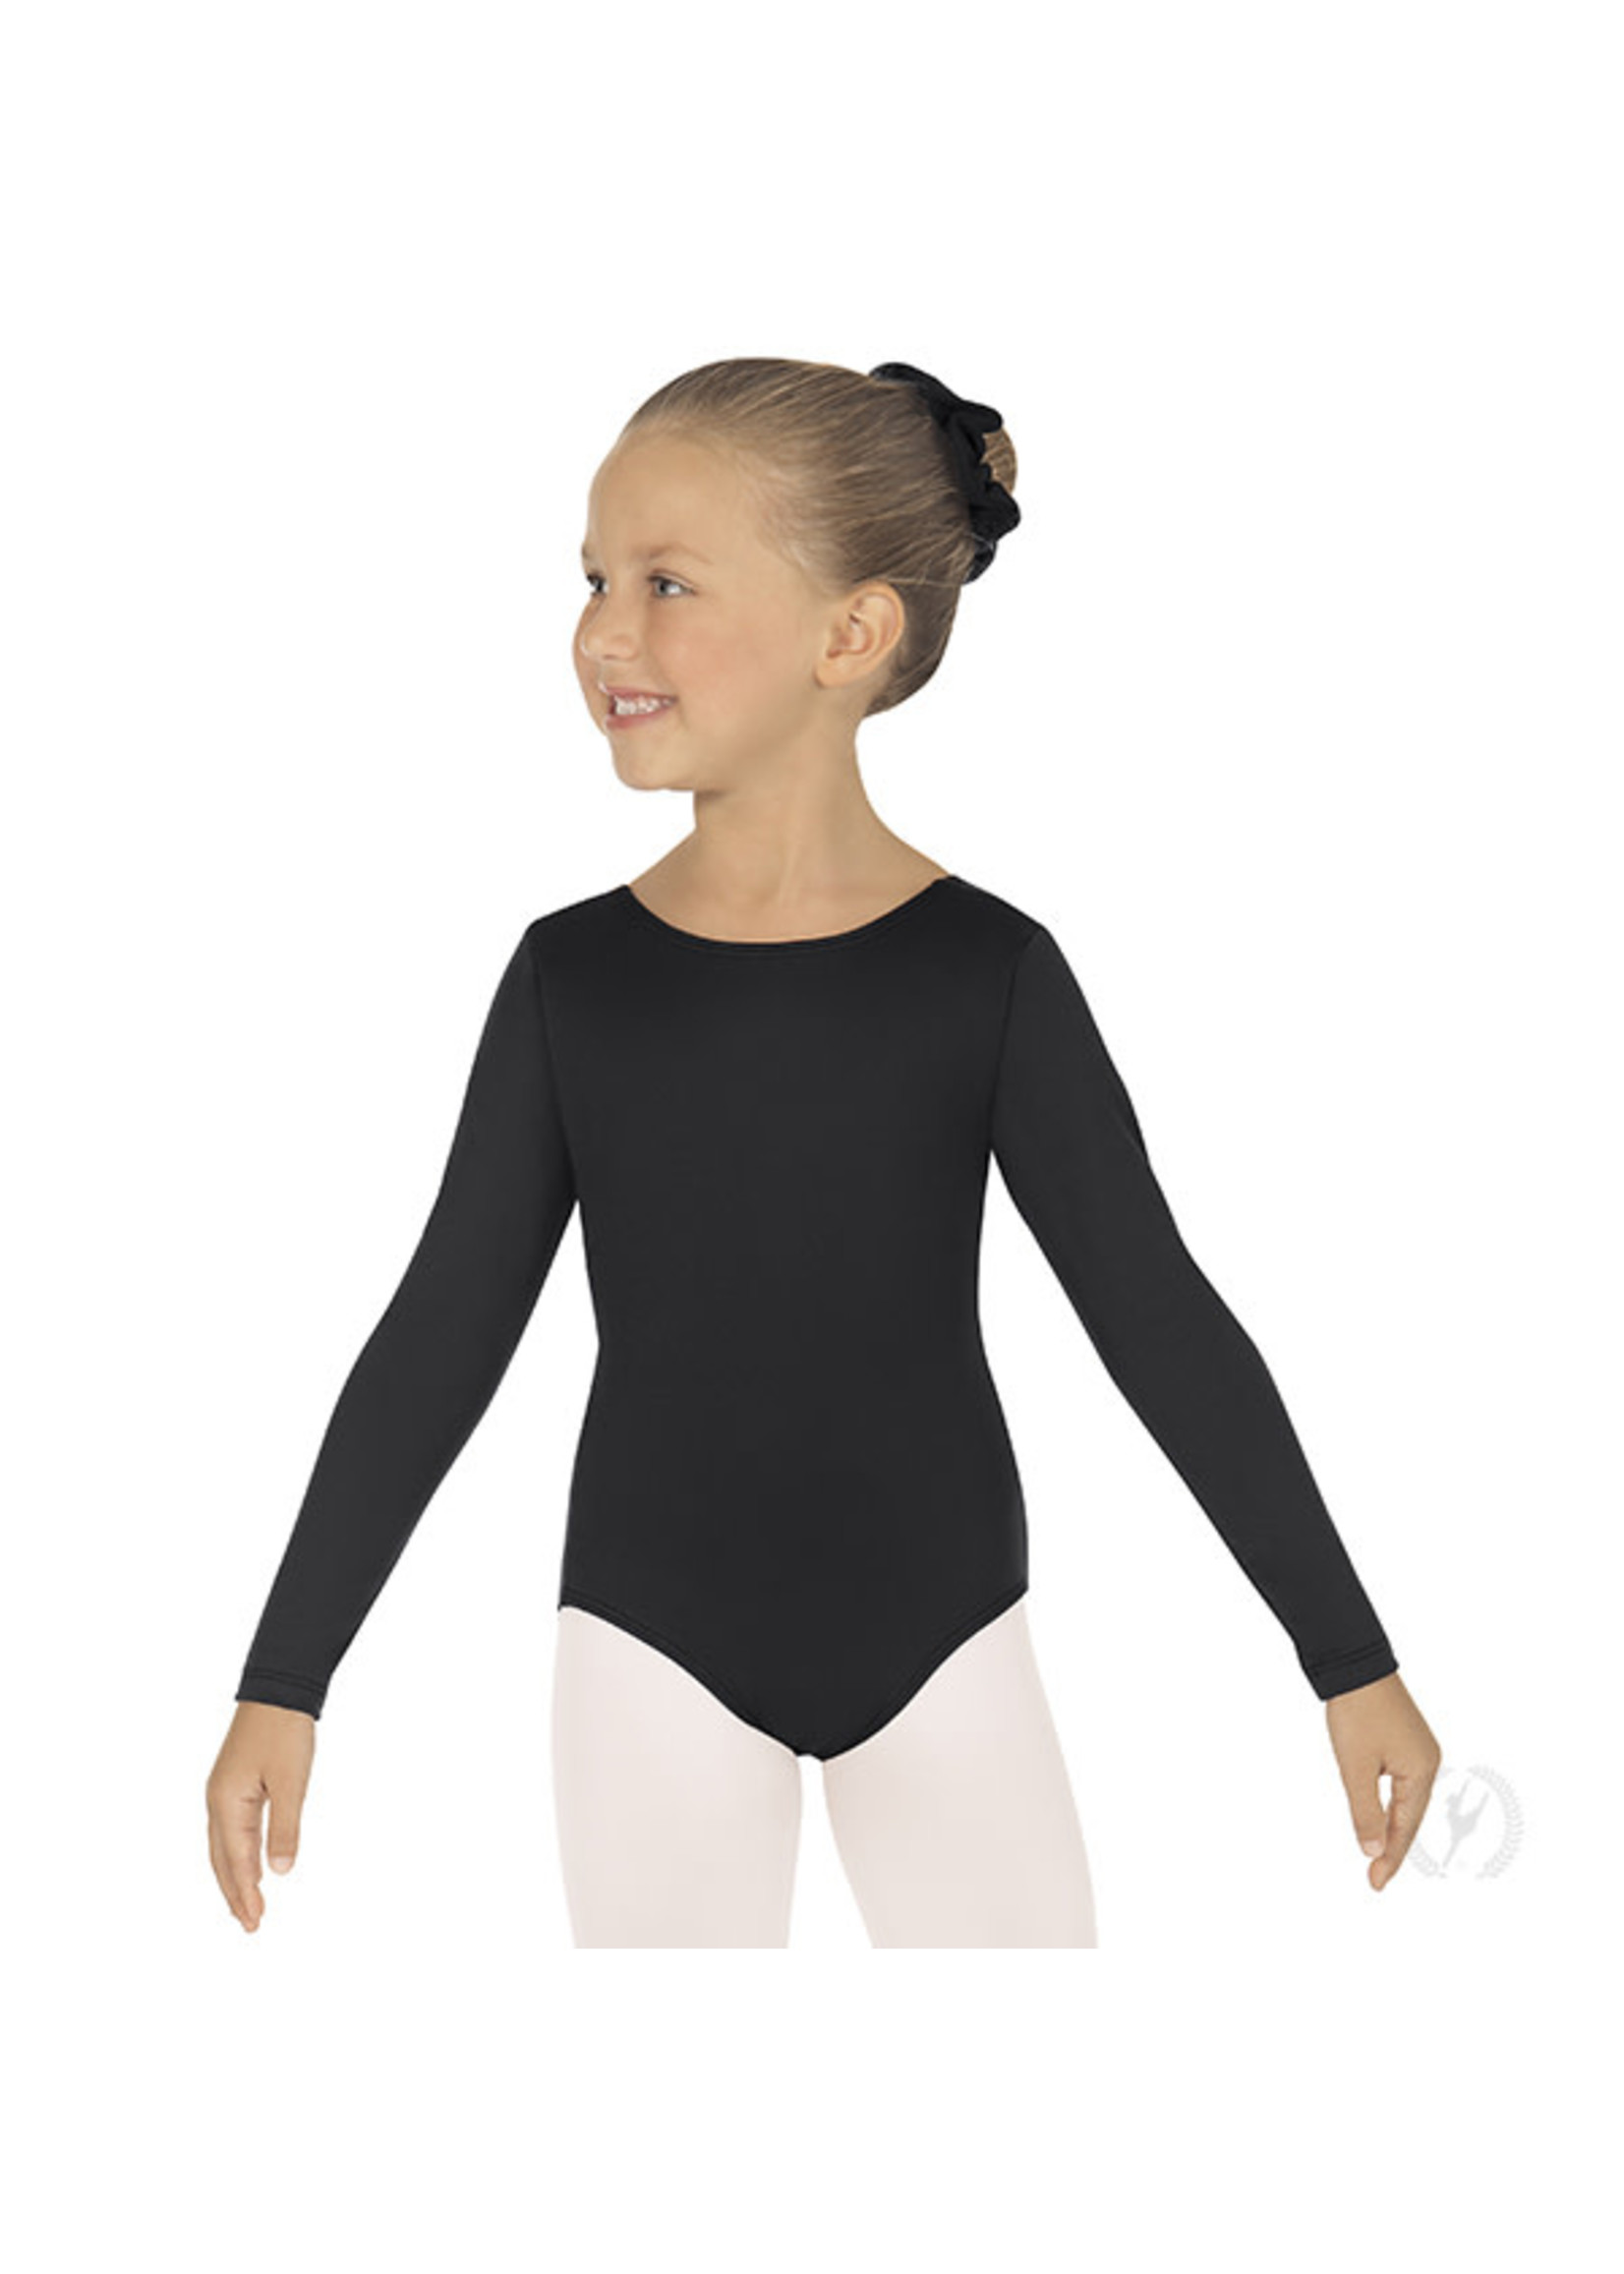 Long Sleeve Leotard with Cotton Lycra - Child